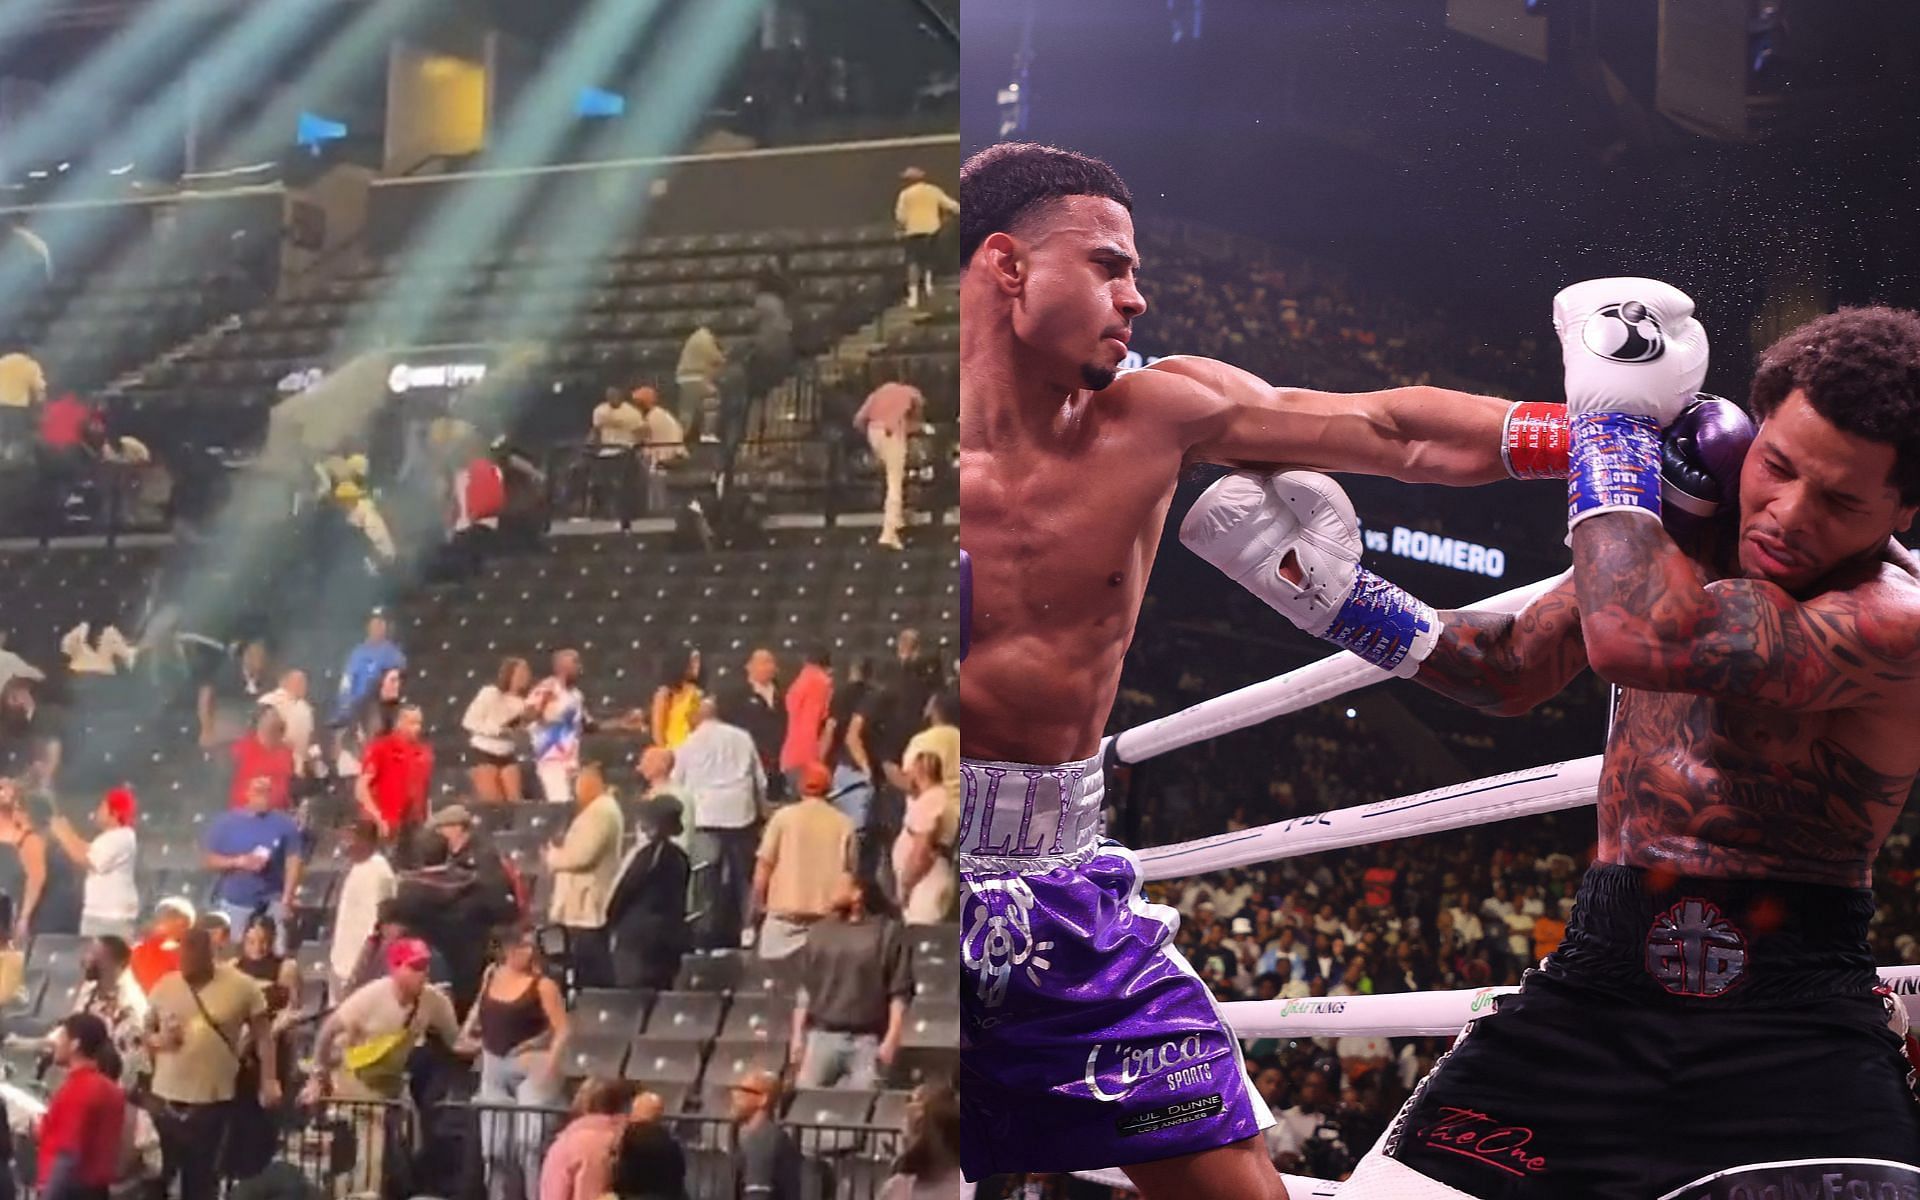 There was absolute mayhem at the Barclays Center following the Gervonta Davis vs. Rolando Romero fight [Left image via @yampapii on Twitter; Right image via Getty]